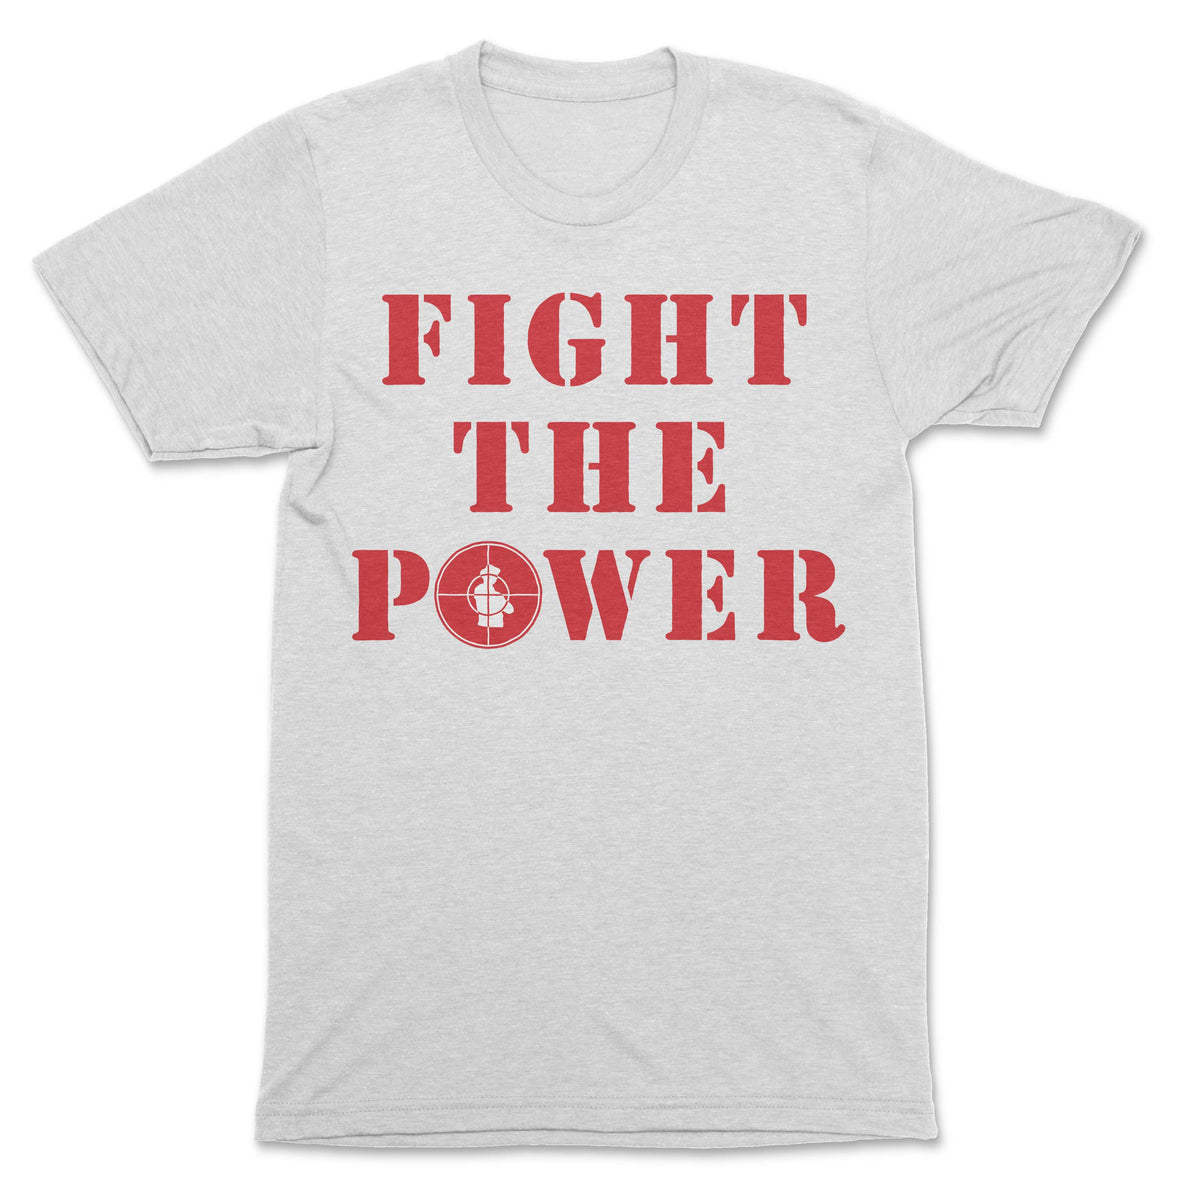 Public Enemy - Fight the Power Premium White T-shirt - OnlyArtistsOfficial